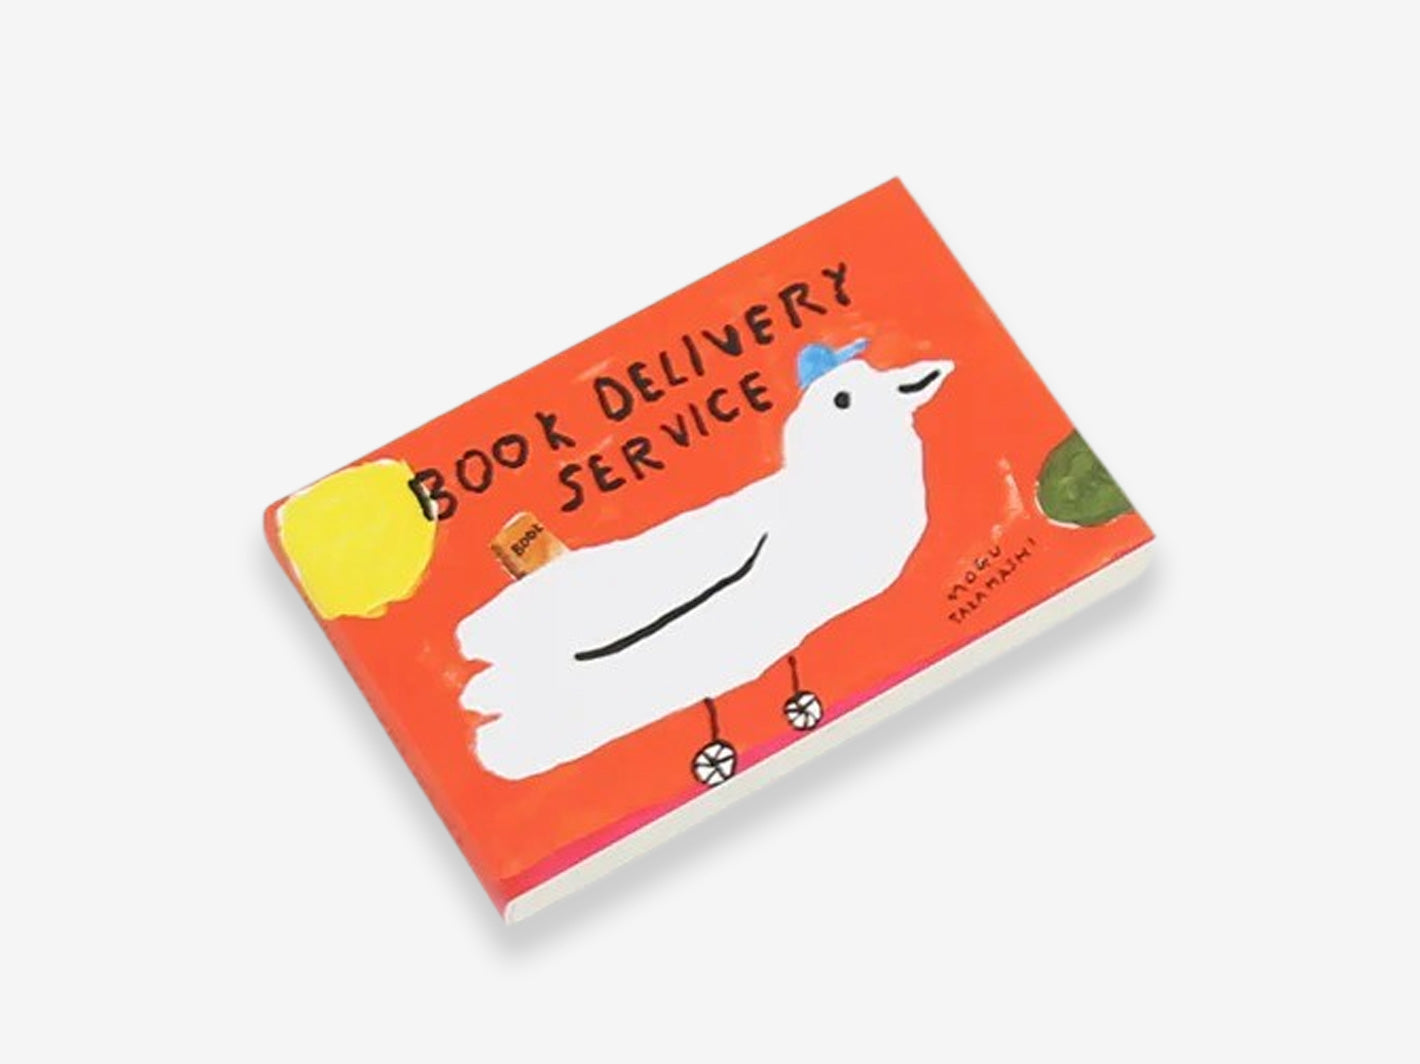 Book Delivery Service Flipbook